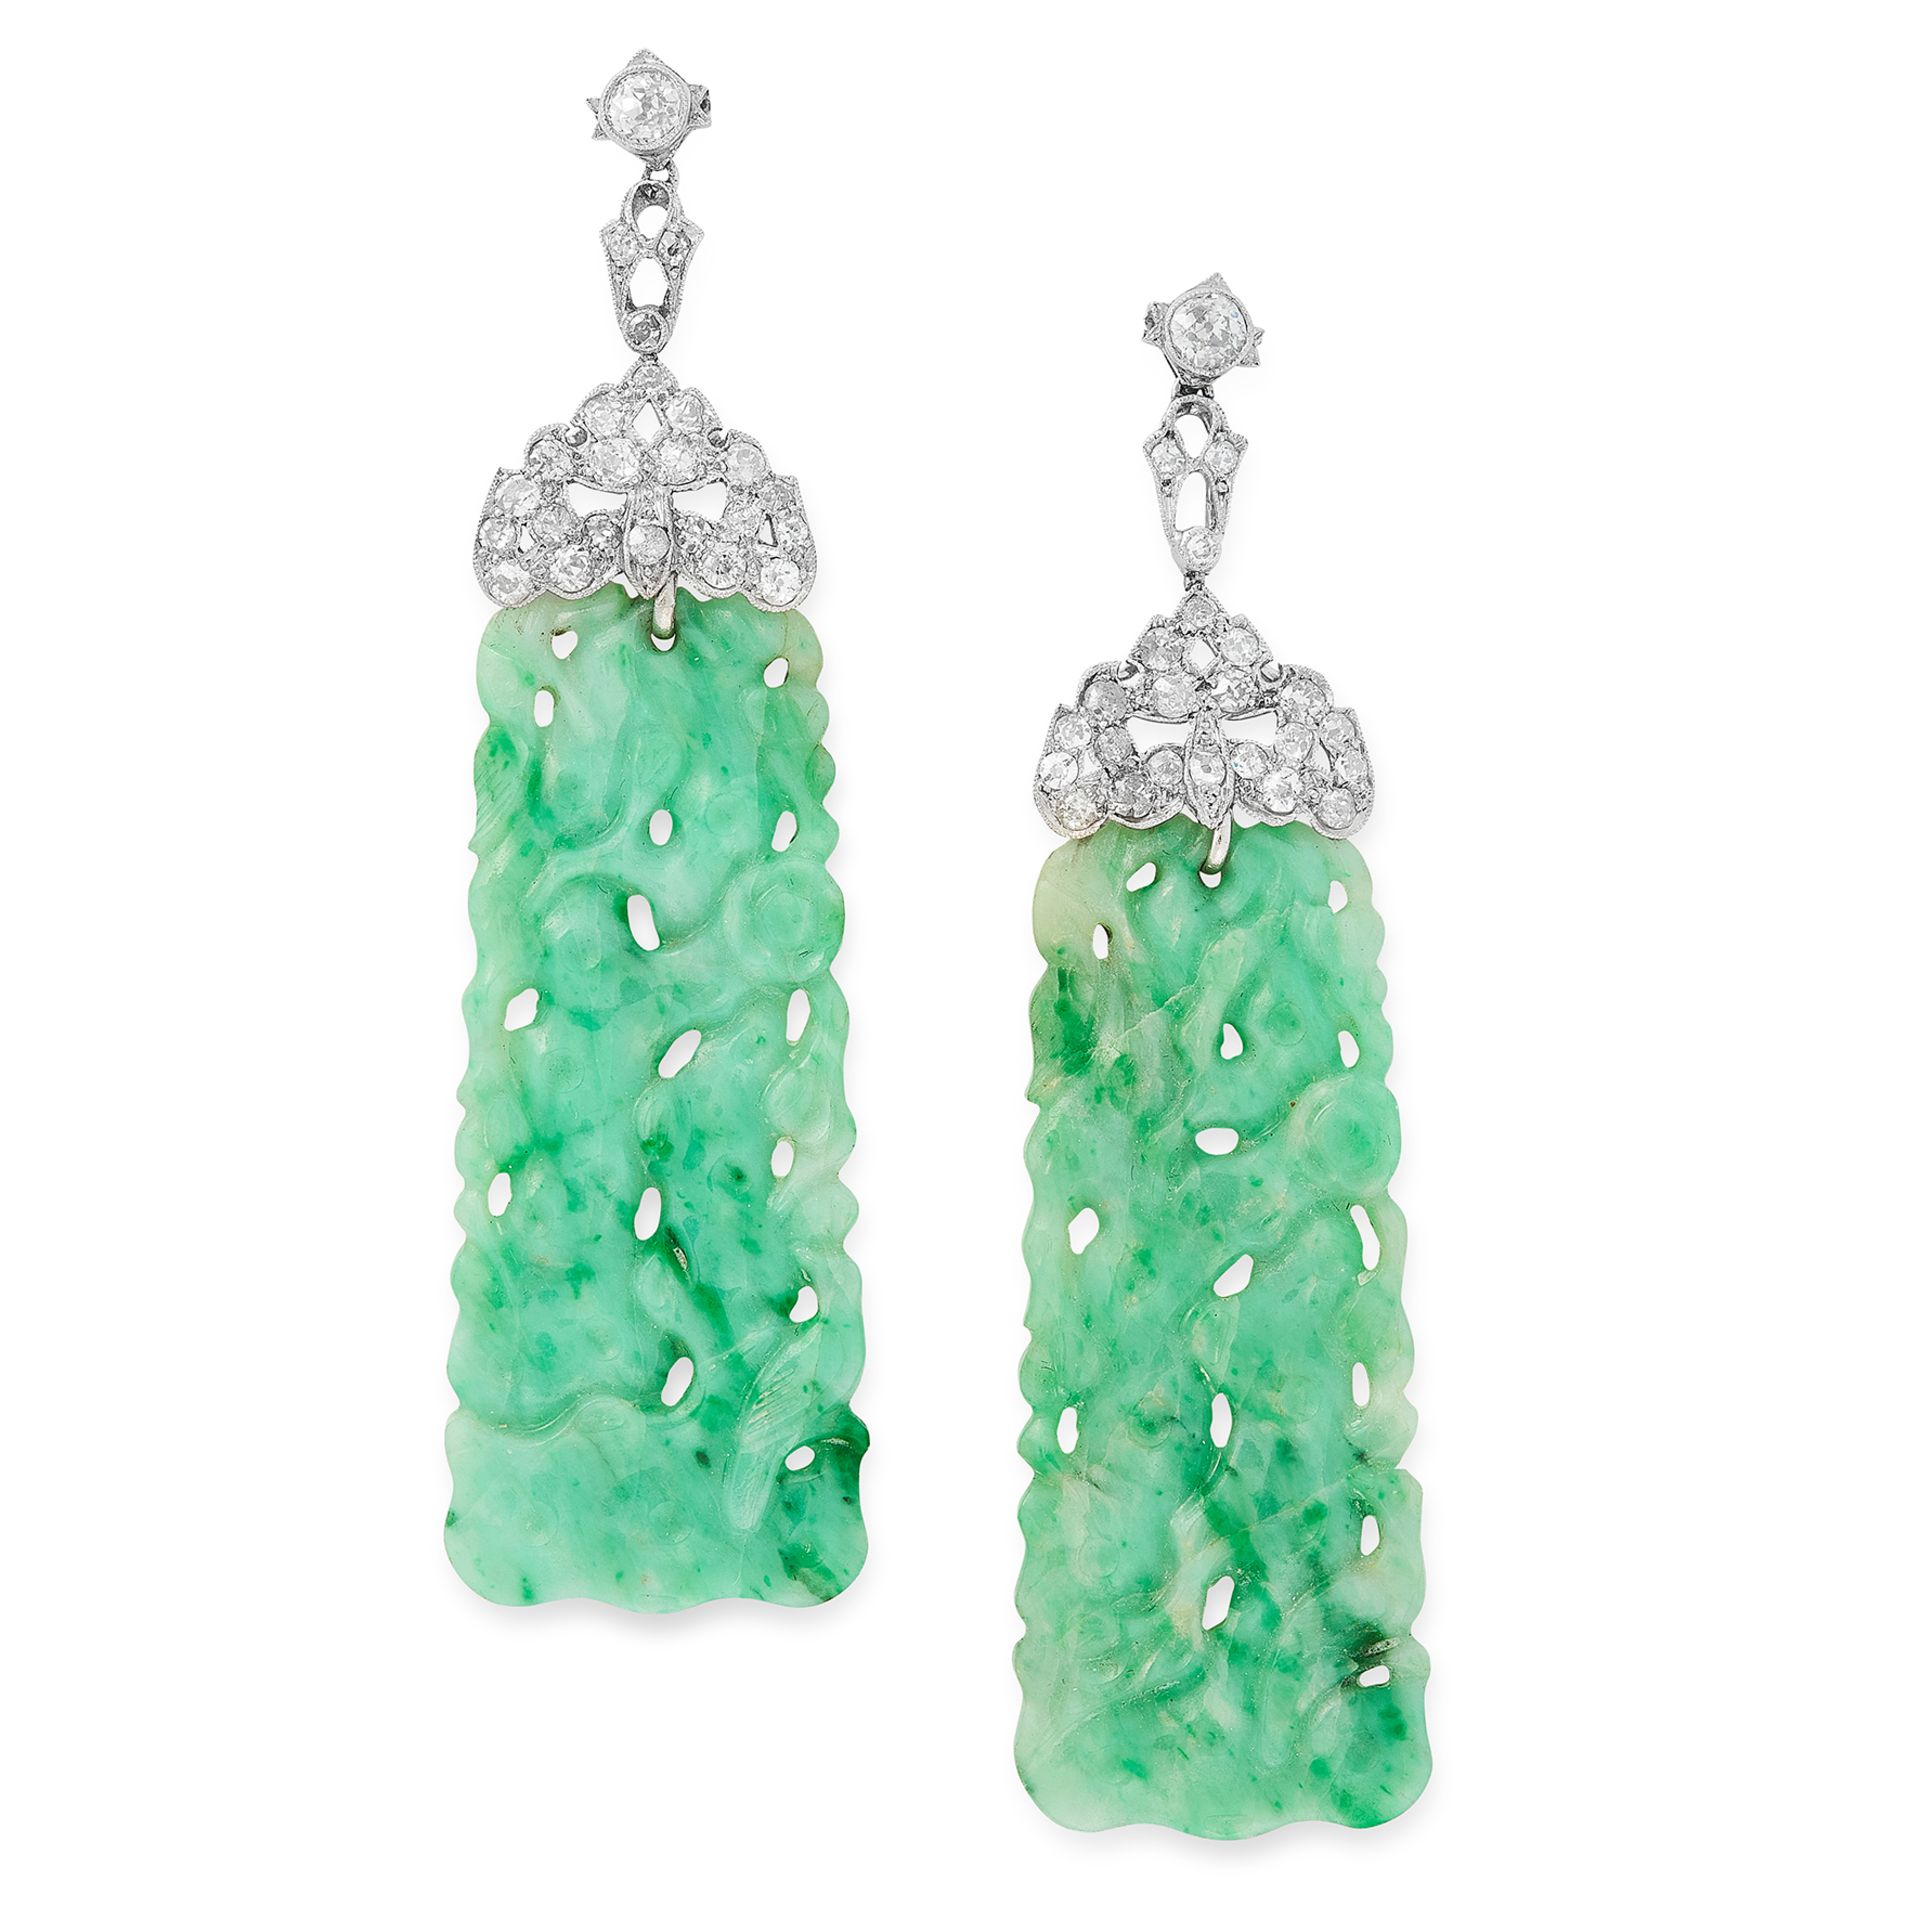 A PAIR OF ART DECO JADEITE JADE AND DIAMOND EARRINGS, EARLY 20TH CENTURY each set with a large